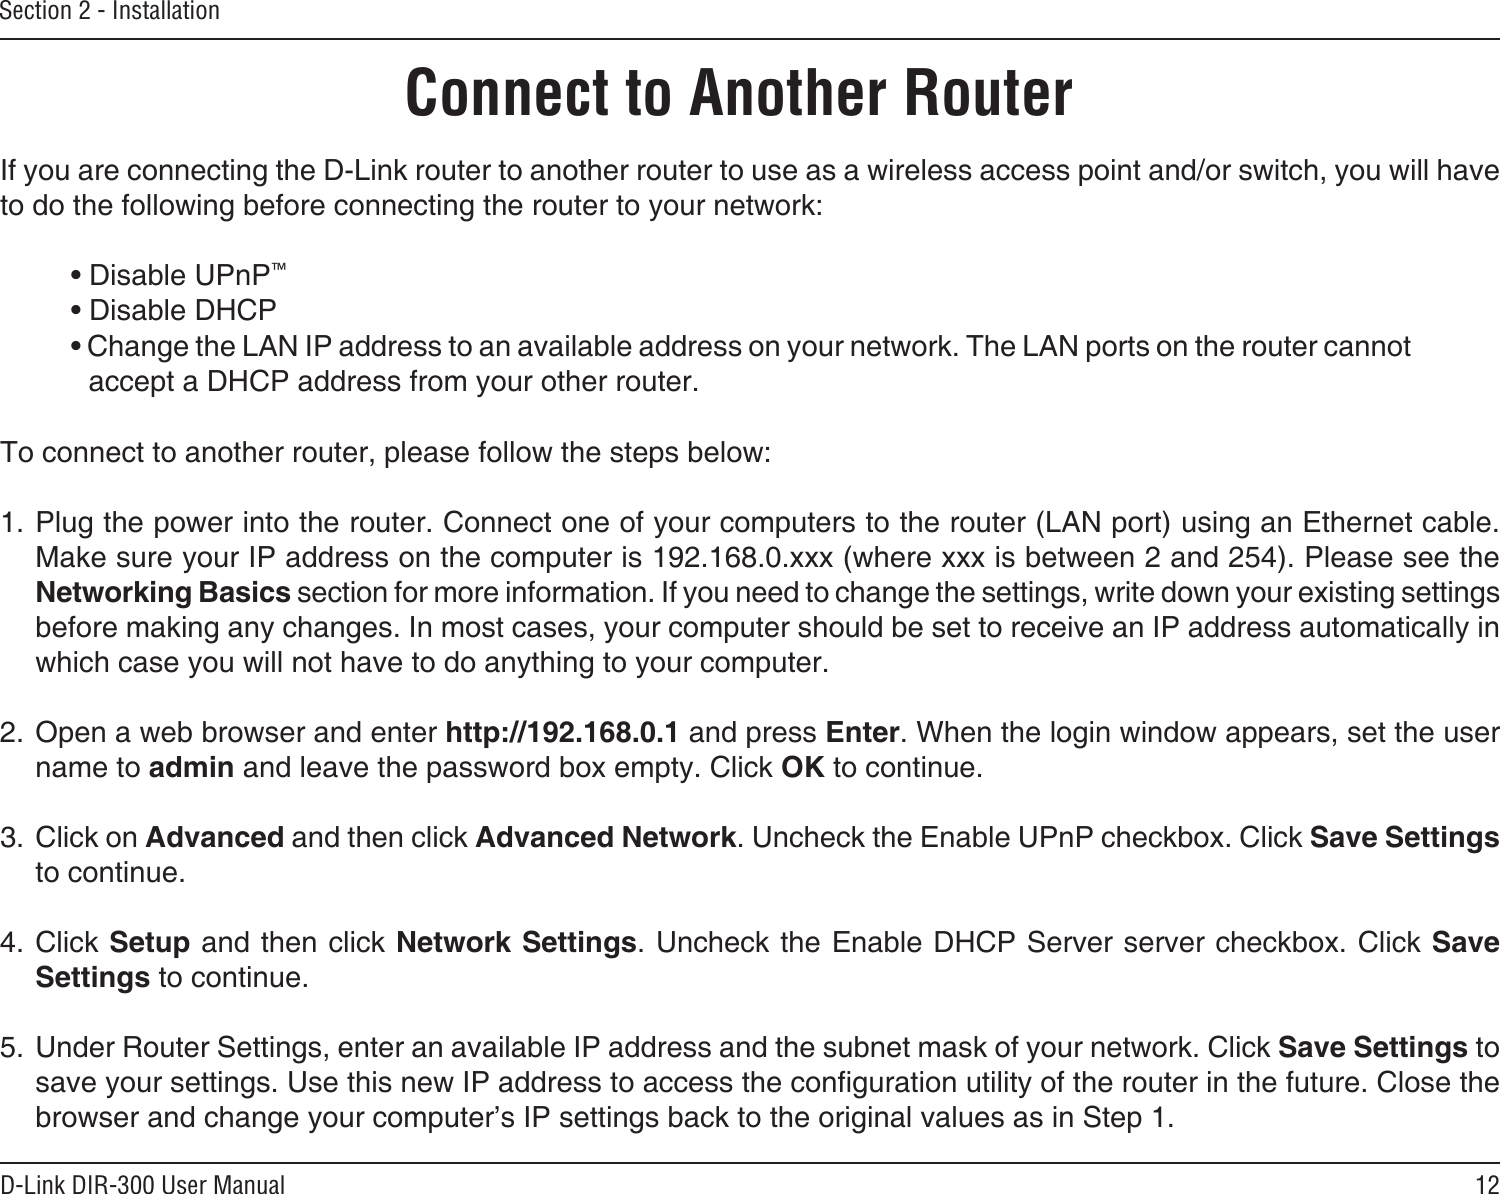 12D-Link DIR-300 User ManualSection 2 - InstallationIf you are connecting the D-Link router to another router to use as a wireless access point and/or switch, you will have to do the following before connecting the router to your network:• Disable UPnP™• Disable DHCP• Change the LAN IP address to an available address on your network. The LAN ports on the router cannot accept a DHCP address from your other router.To connect to another router, please follow the steps below:1. Plug the power into the router. Connect one of your computers to the router (LAN port) using an Ethernet cable. Make sure your IP address on the computer is 192.168.0.xxx (where xxx is between 2 and 254). Please see the Networking Basics section for more information. If you need to change the settings, write down your existing settings before making any changes. In most cases, your computer should be set to receive an IP address automatically in which case you will not have to do anything to your computer.2. Open a web browser and enter http://192.168.0.1 and press Enter. When the login window appears, set the user name to admin and leave the password box empty. Click OK to continue.3. Click on Advanced and then click Advanced Network. Uncheck the Enable UPnP checkbox. Click Save Settings to continue. 4. Click Setup and then click Network Settings. Uncheck the Enable DHCP Server server checkbox. Click Save Settings to continue.5. Under Router Settings, enter an available IP address and the subnet mask of your network. Click Save Settings to save your settings. Use this new IP address to access the conguration utility of the router in the future. Close the browser and change your computer’s IP settings back to the original values as in Step 1.Connect to Another Router